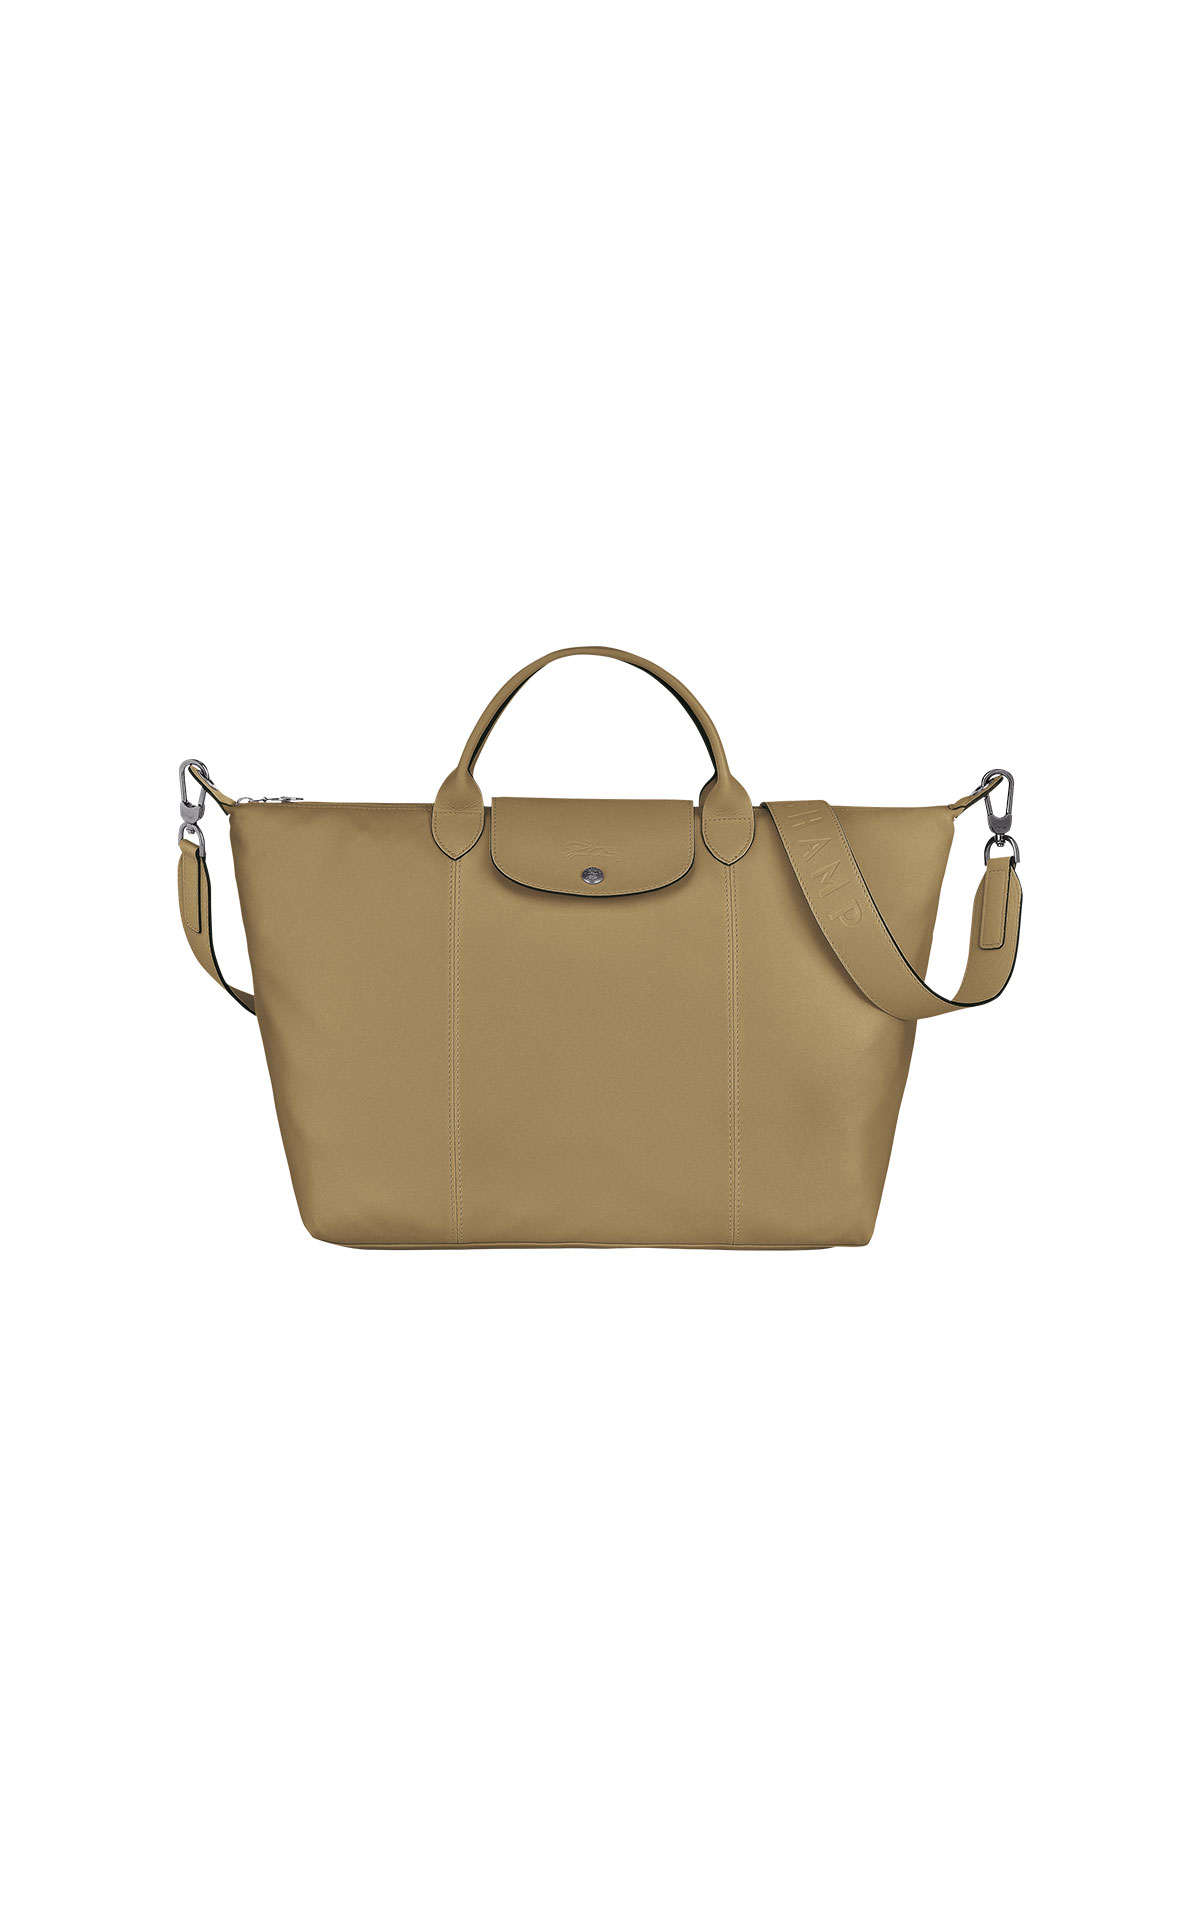 Longchamp Le pliage cuir top handle bag with detachable strap from Bicester Village